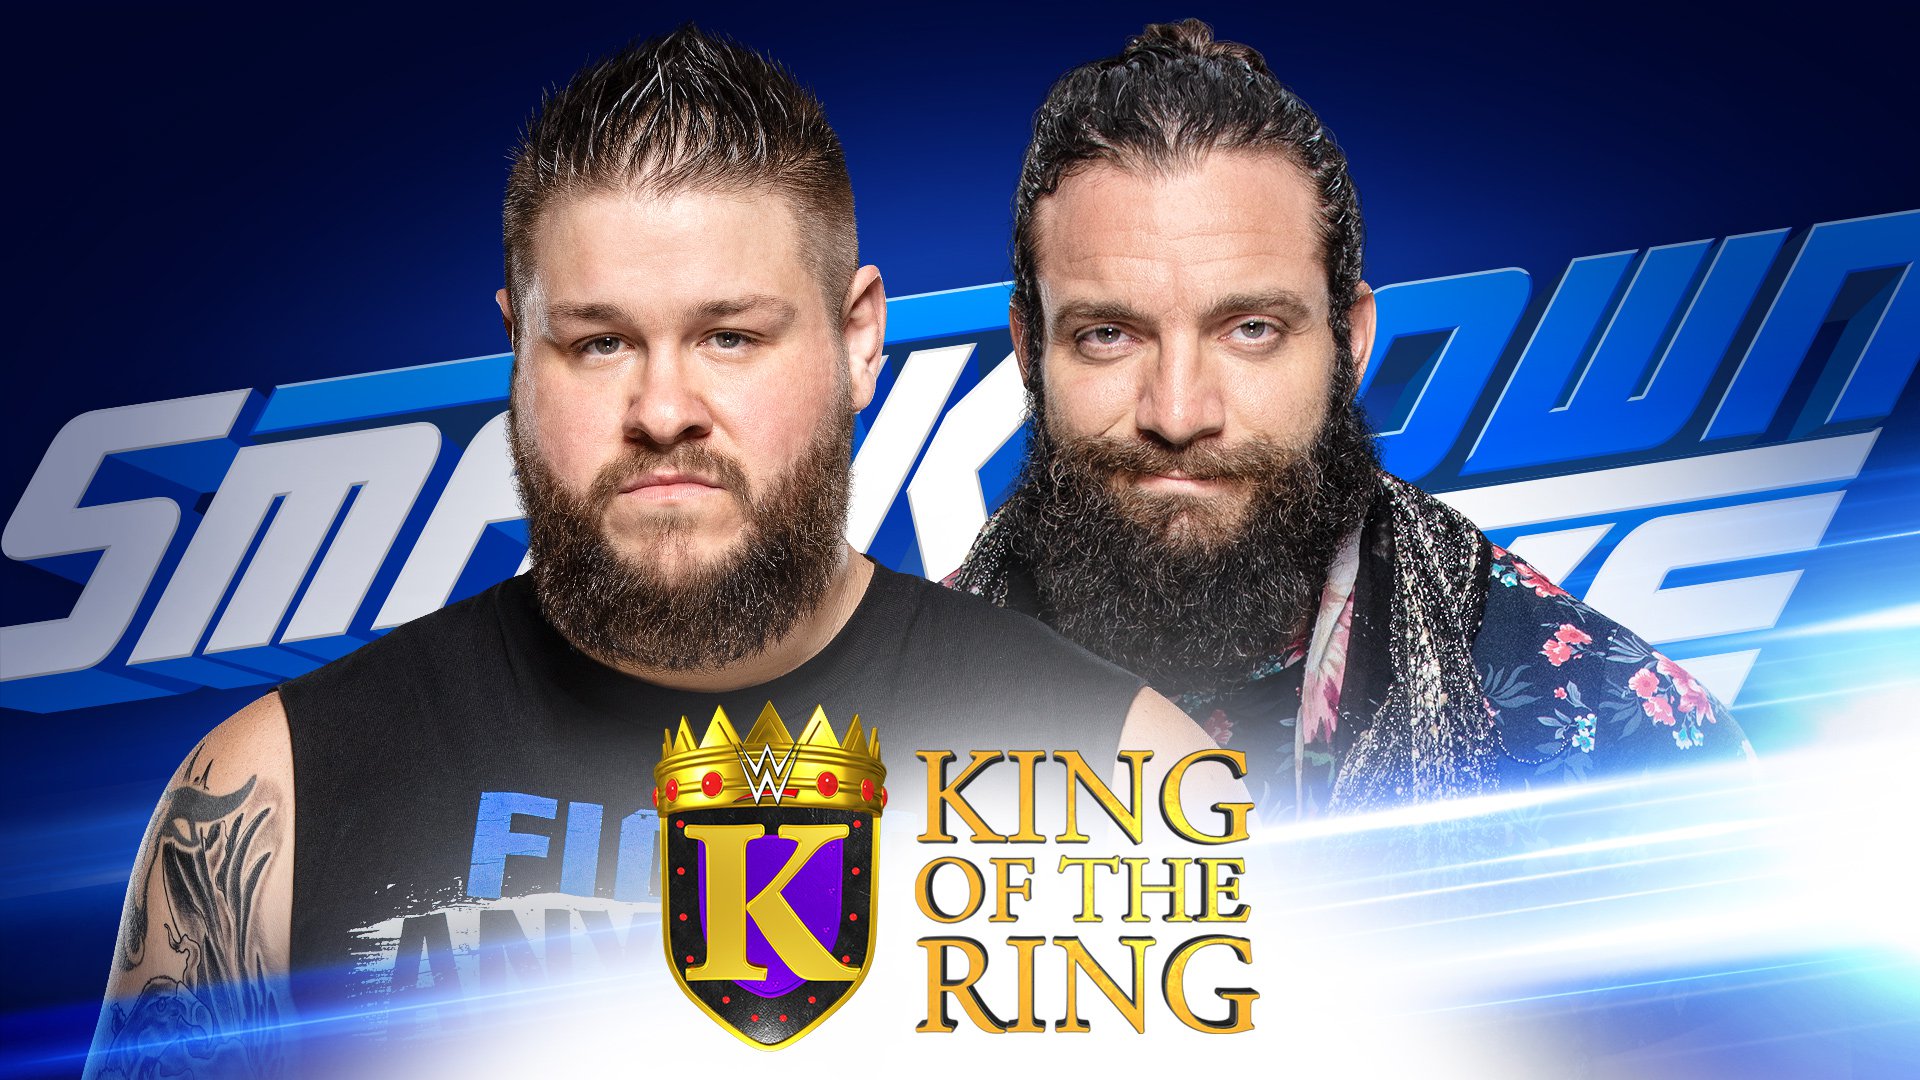 WWE king of the ring 2019 Kevin Owens